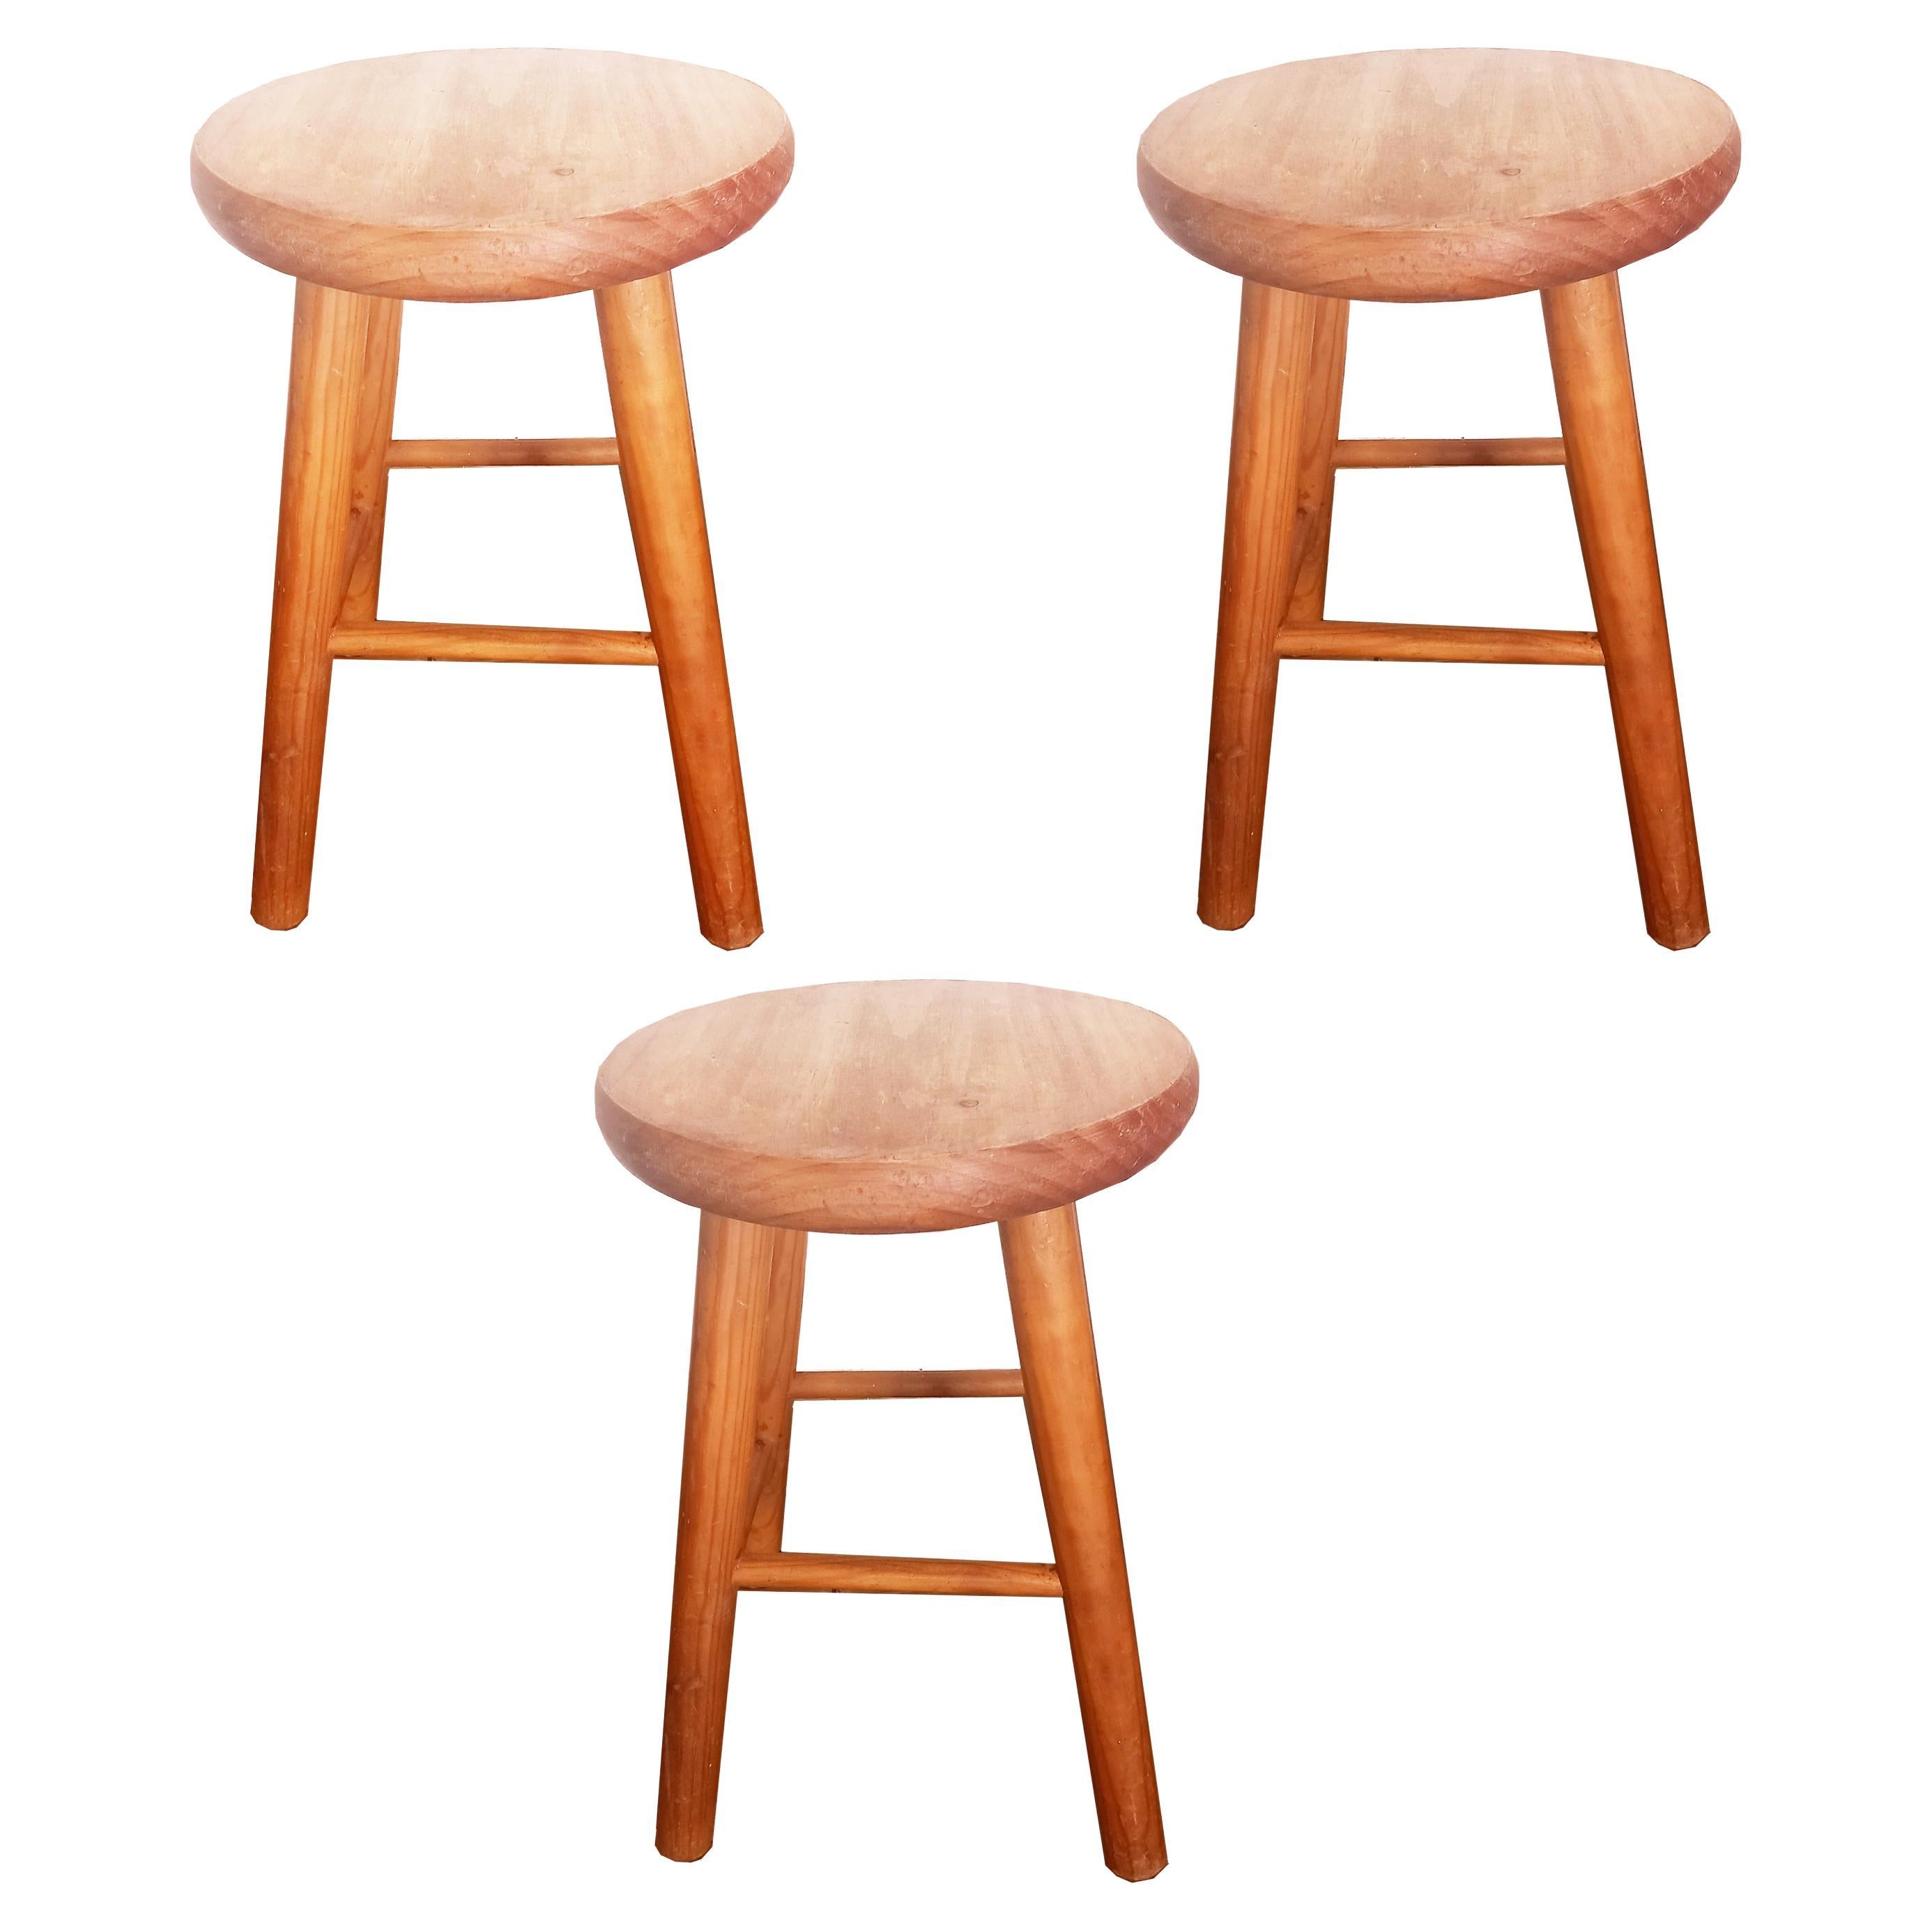 Stools from the Mid 20th Century in Natural Wood